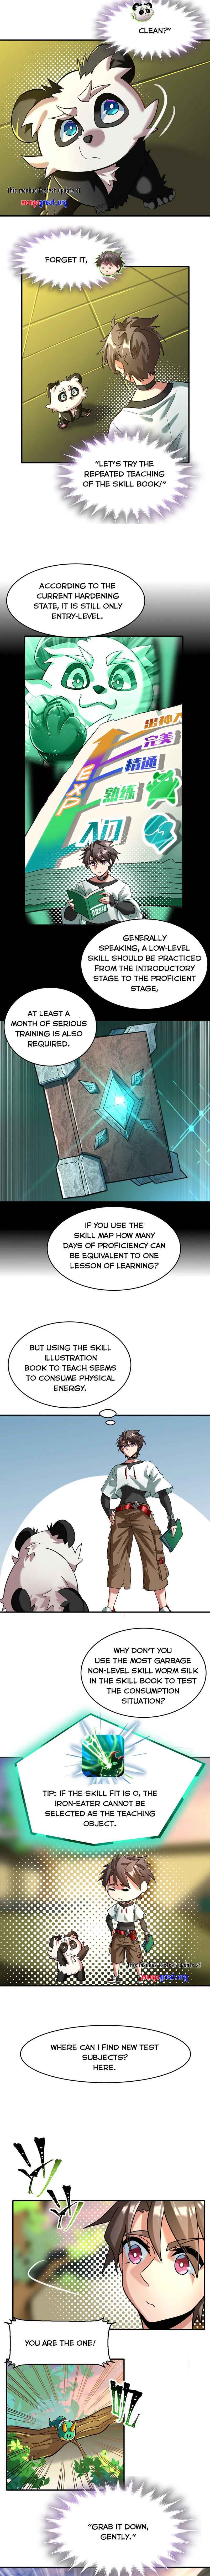 Unscientific Tame - Page 3